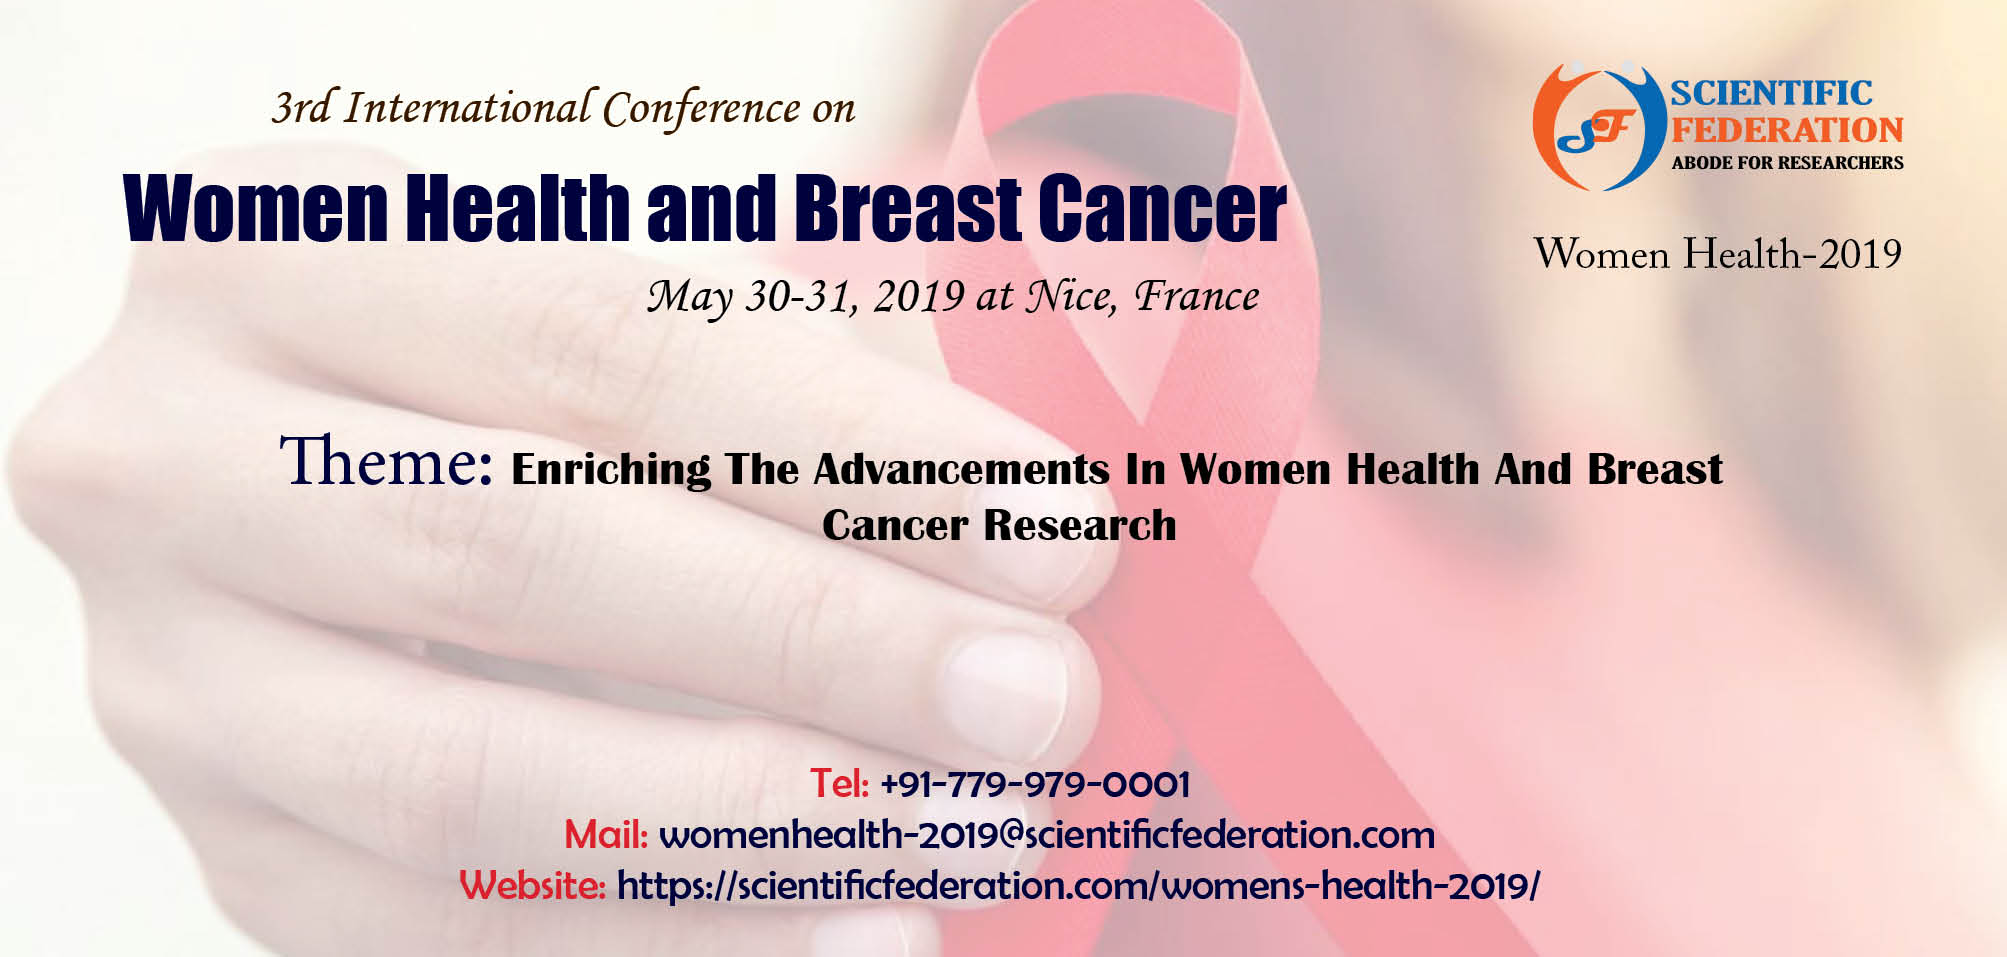 Photos of 3rd International Conference on Women Health and Breast Cancer